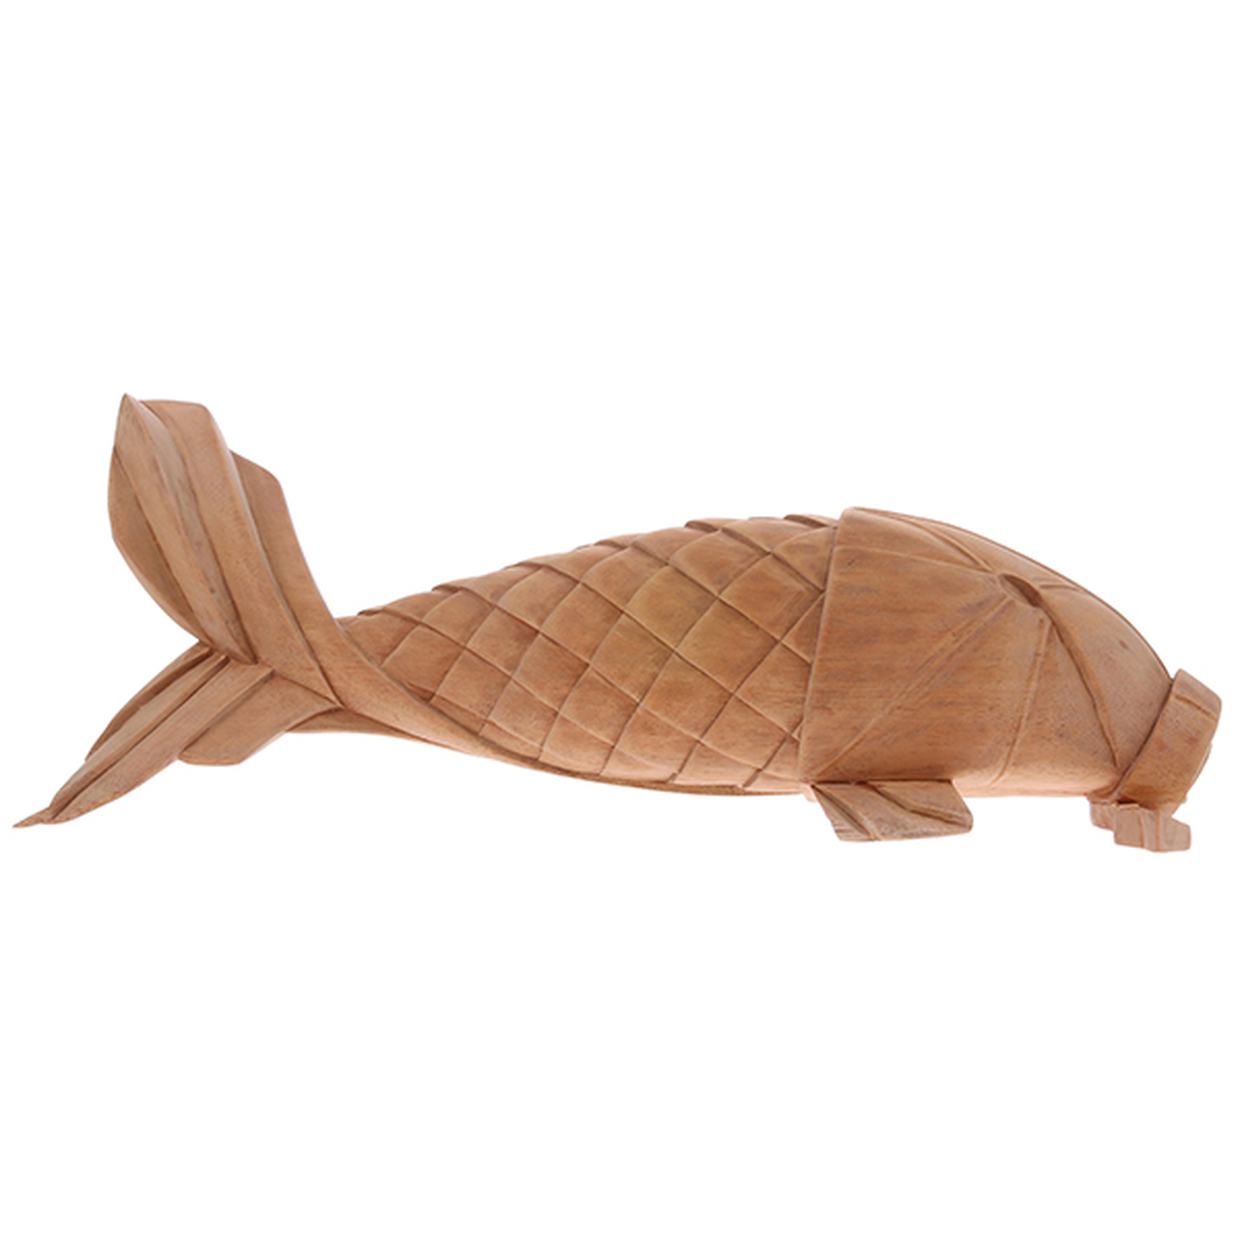 Hand carved wooden carp fish